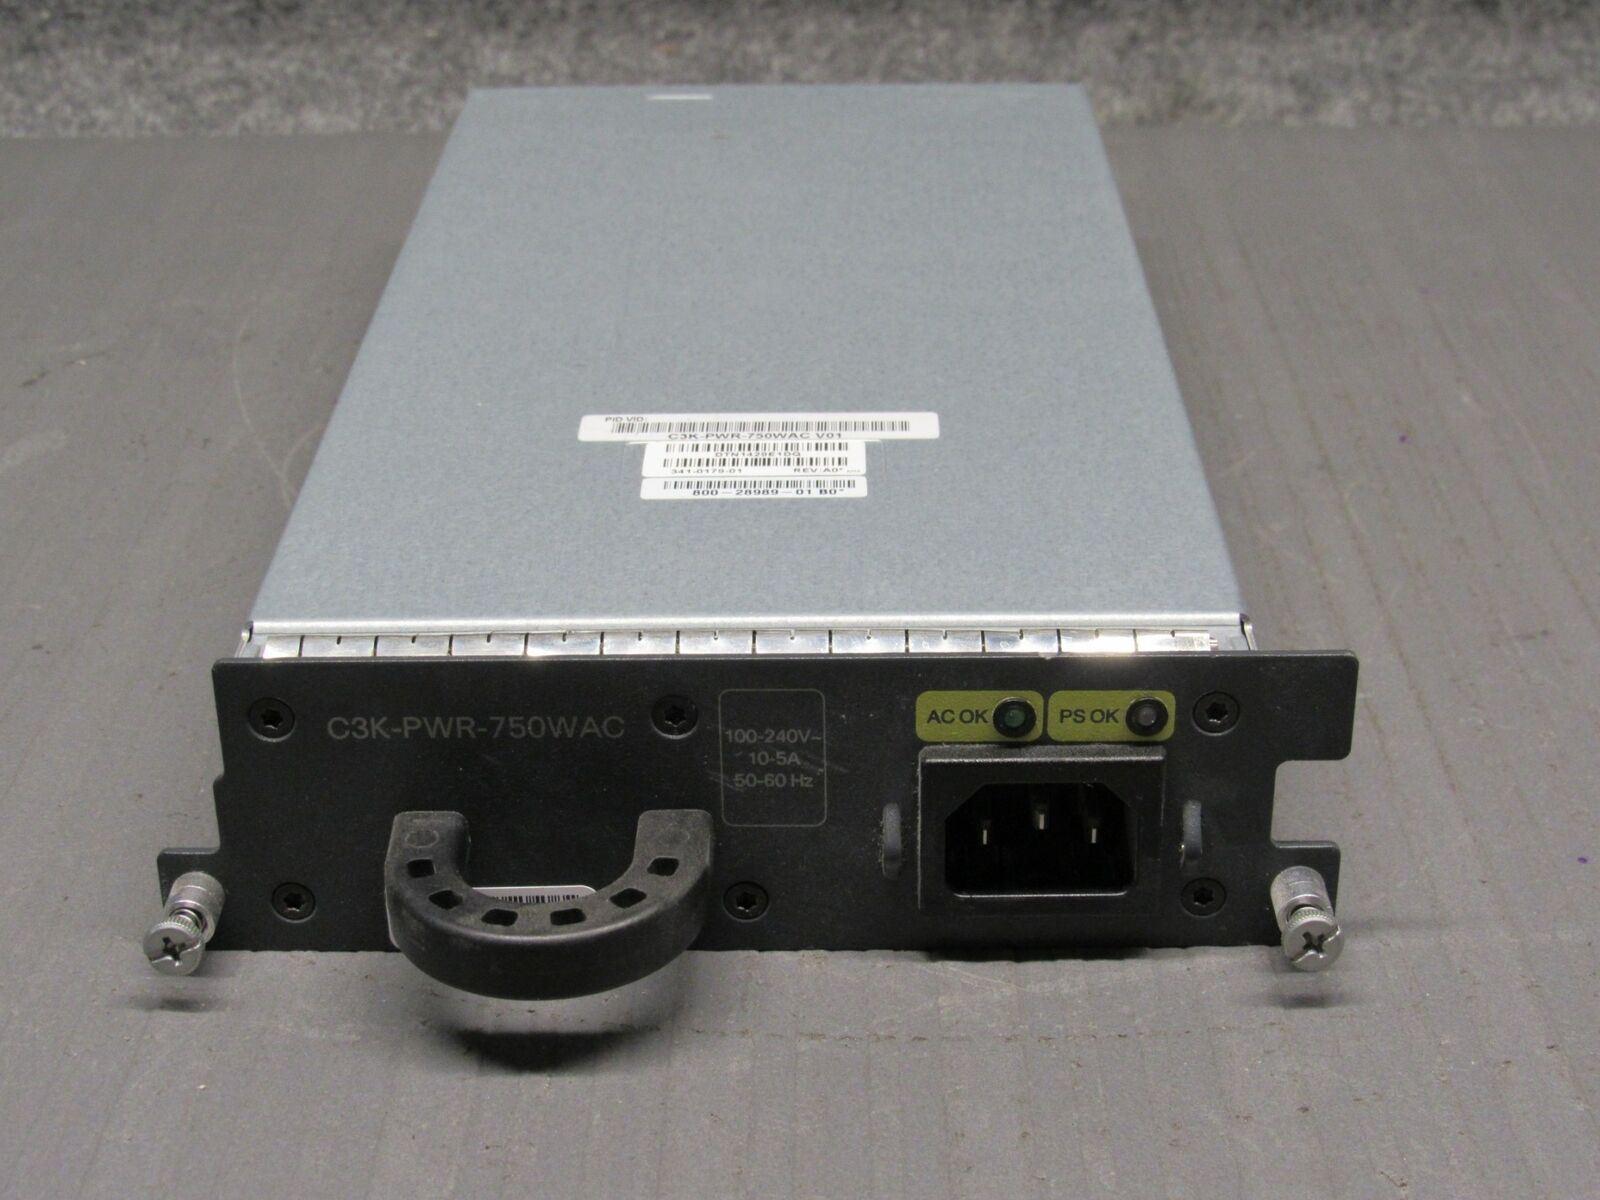 C3K PWR 750WAC 341 0179 01 dpsn 747ab a dpsn 747ab a cisco 750 watt ac power supply for catalyst 3750x 3560x